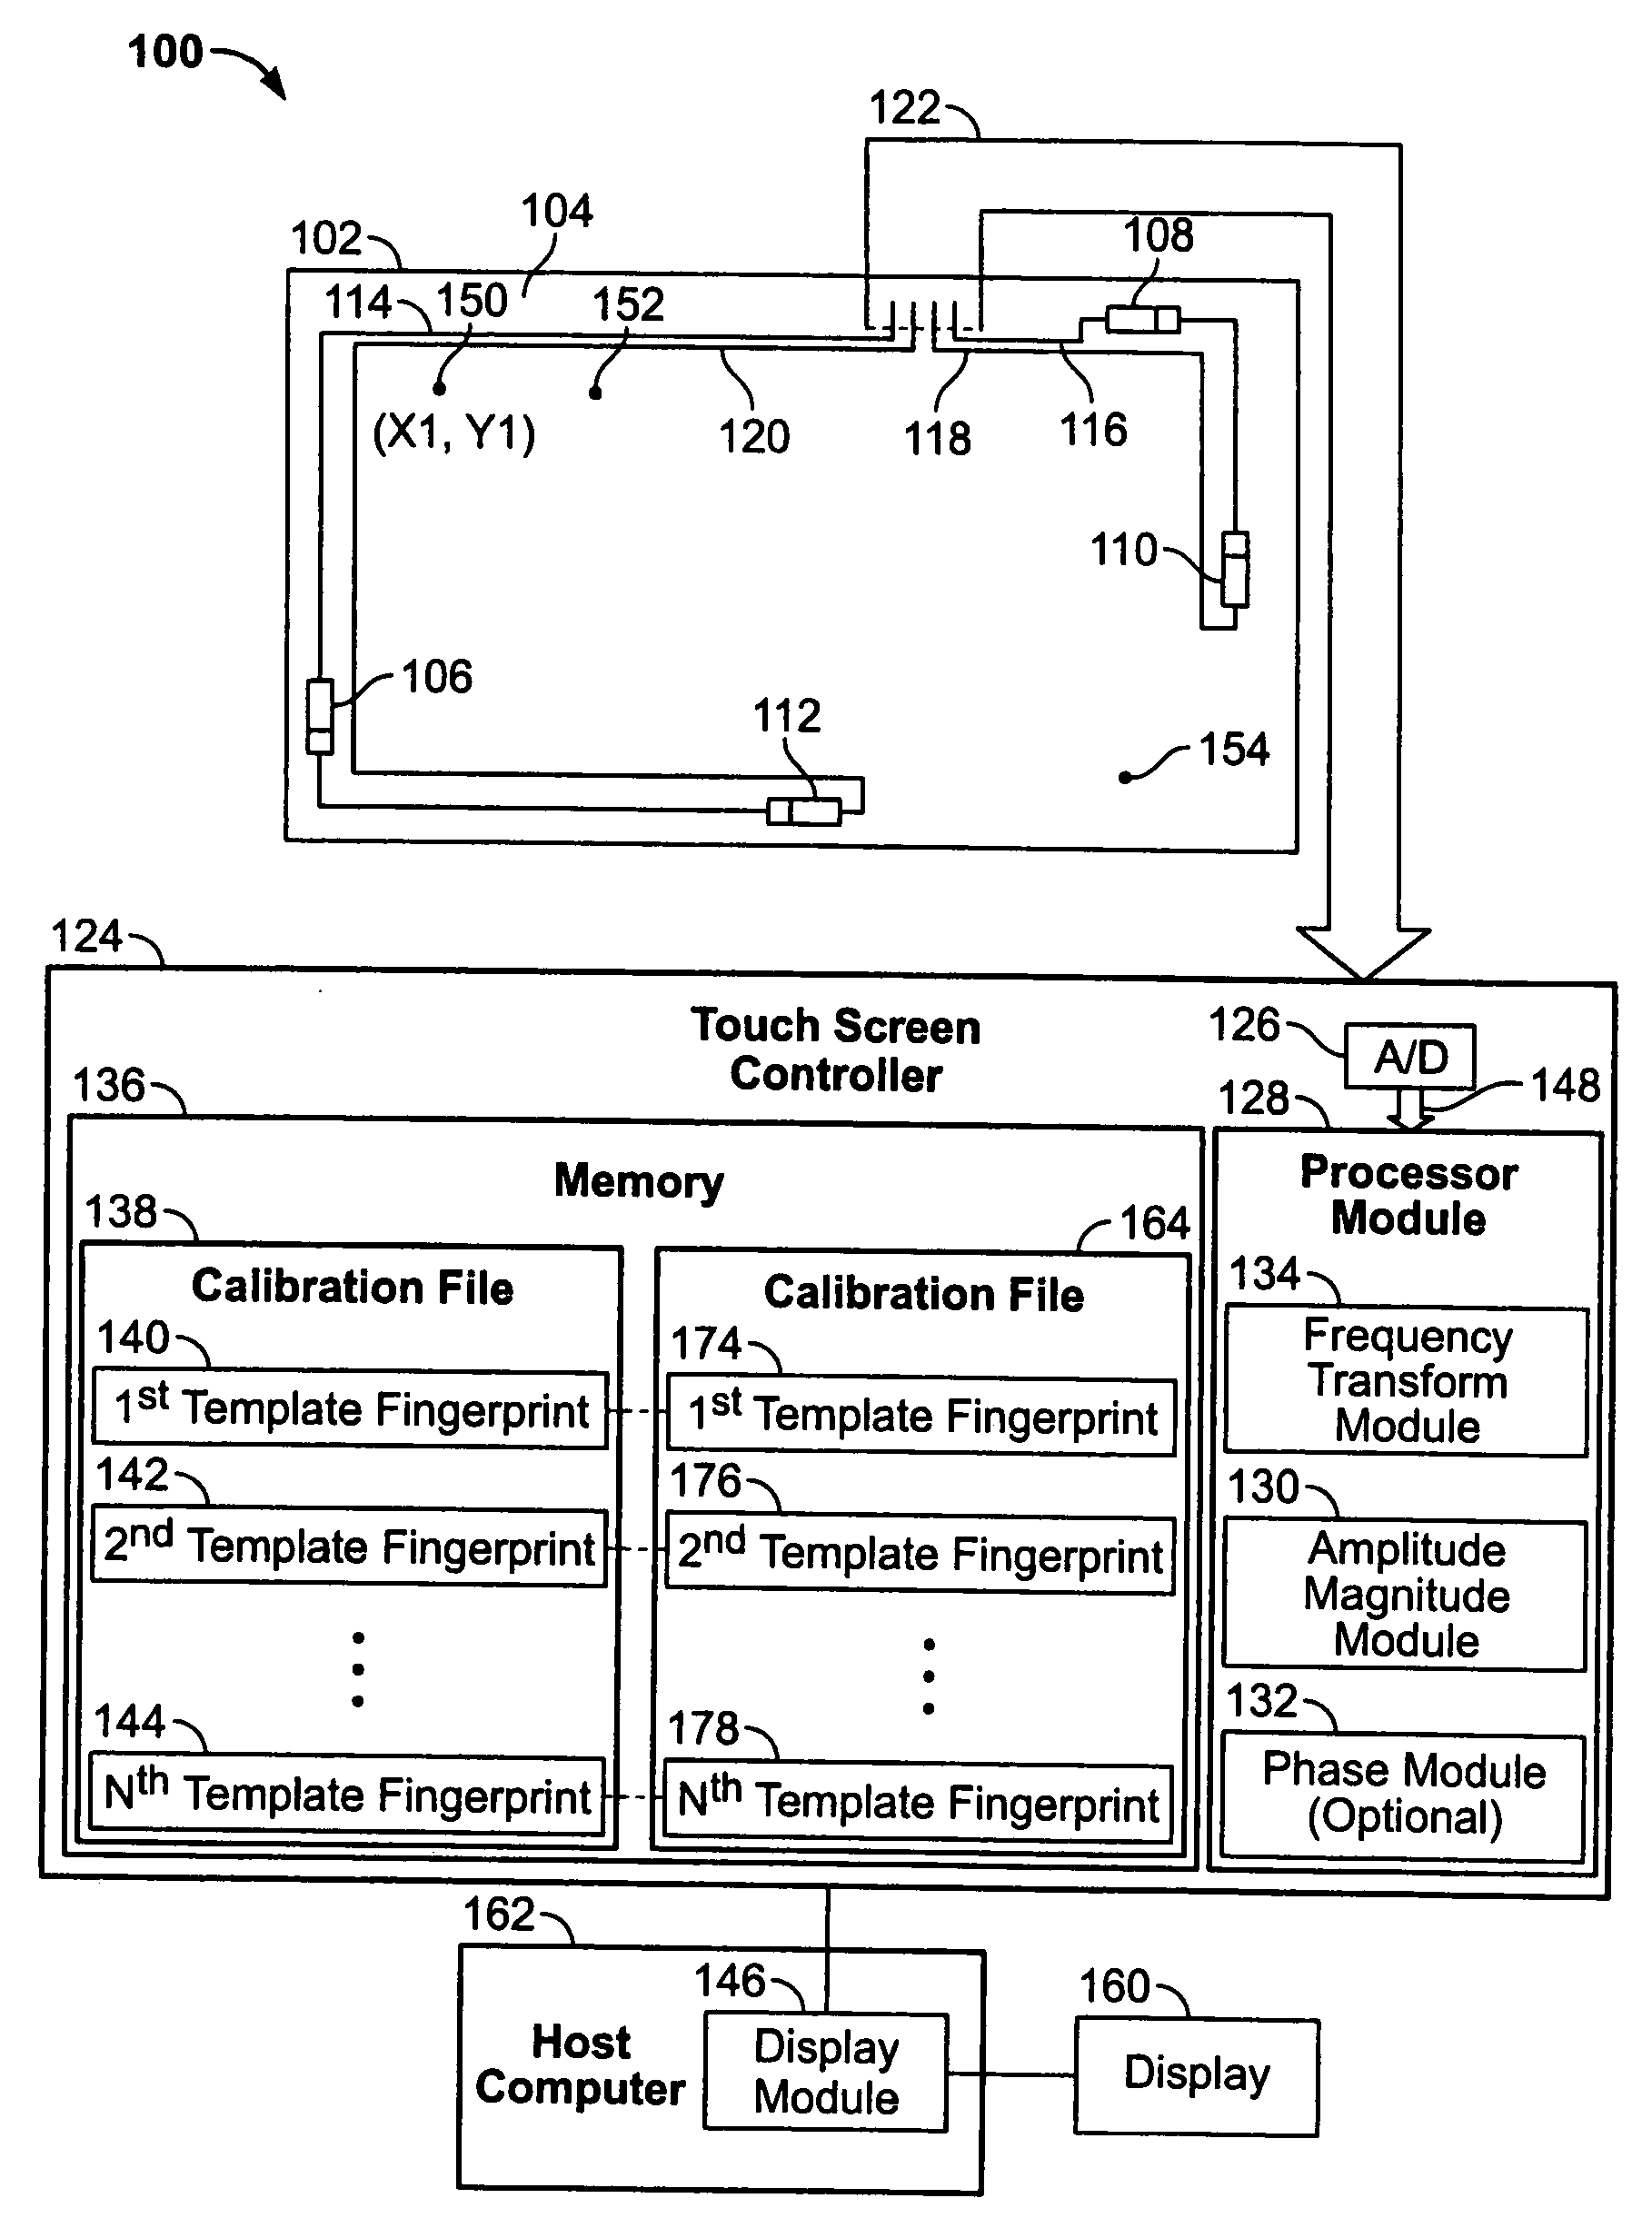 Method and system for detecting touch events based on redundant validation